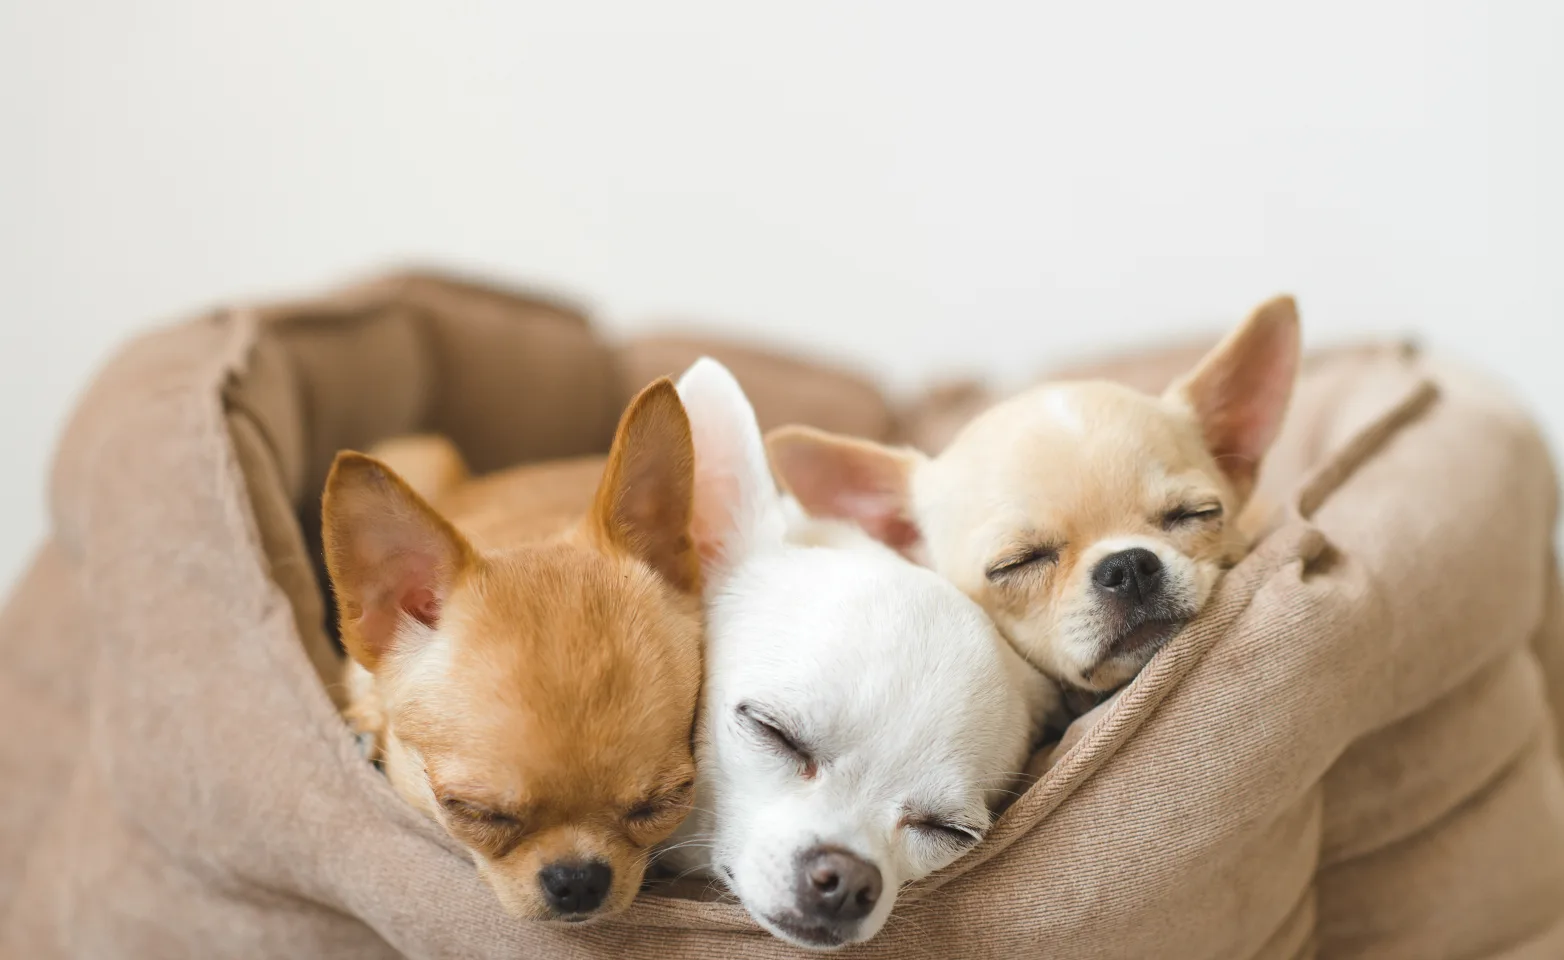 Chihuahua dogs sleeping in dog bed together